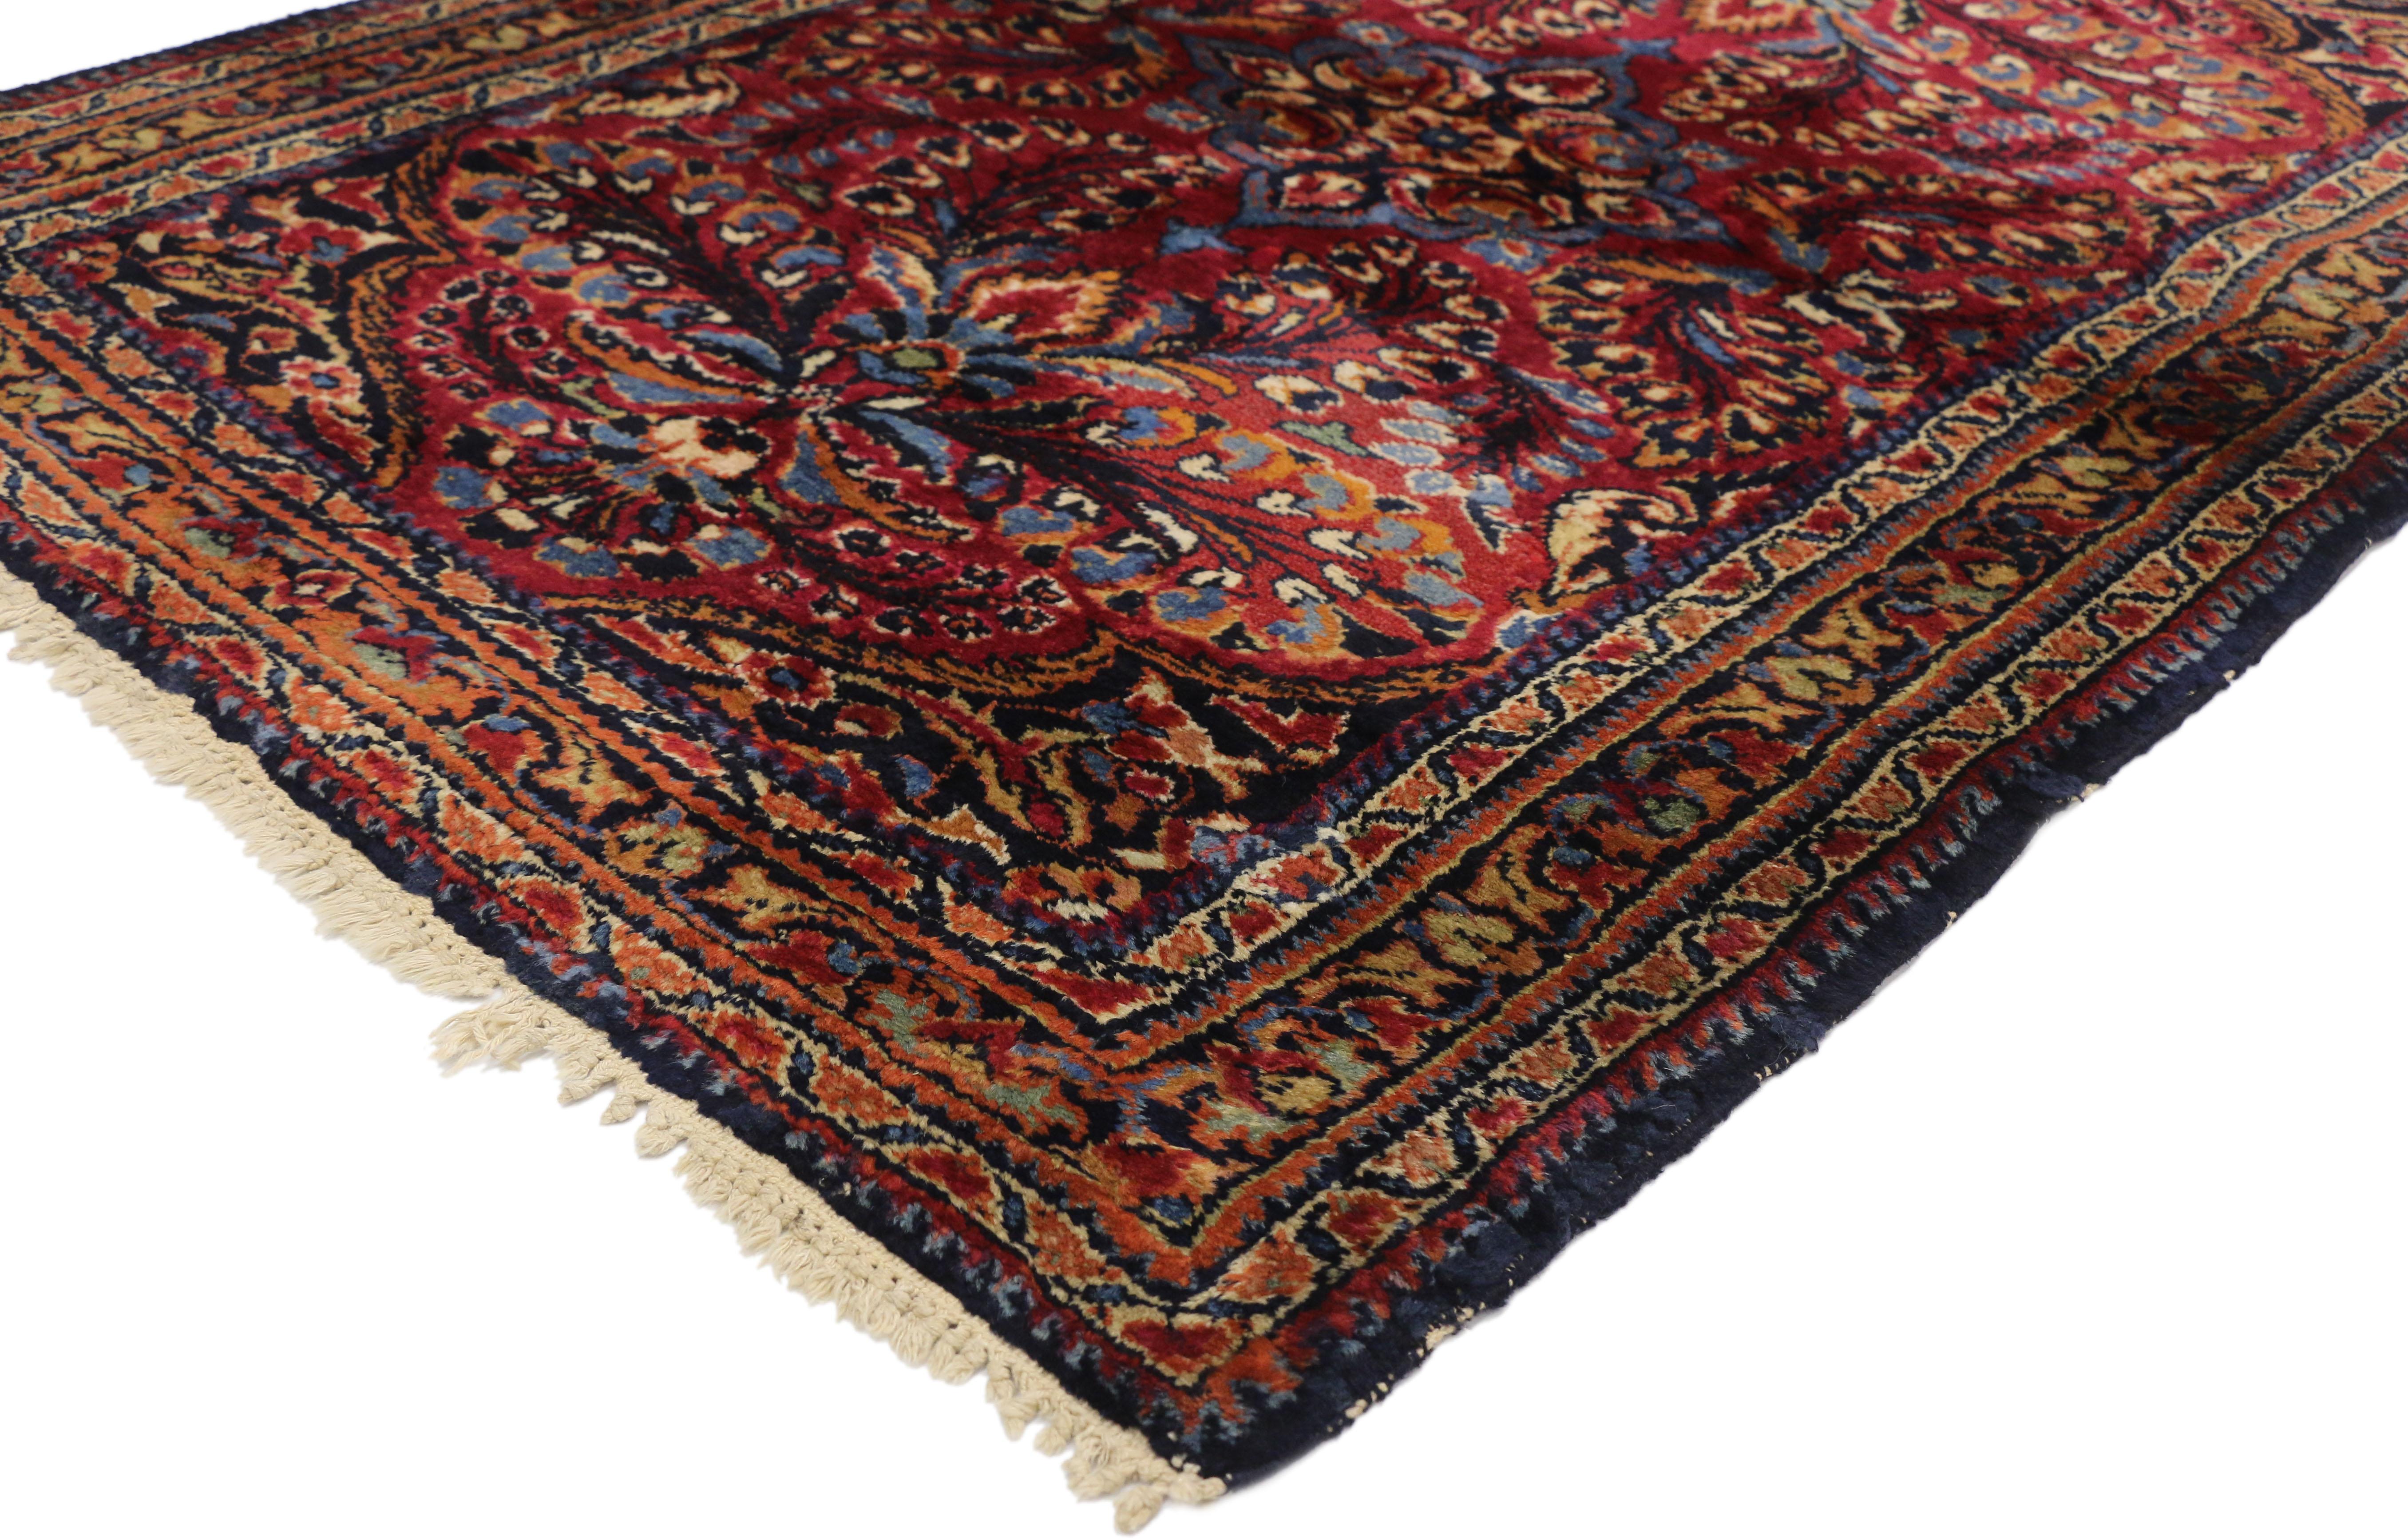 72590 Antique Persian Lilihan rug with Preppy Jacobean style. This hand knotted wool antique Persian Lilihan rug features an all-over floral pattern with a center cusped medallion set with a round floret and anchored by two fleur de lis pendants. A